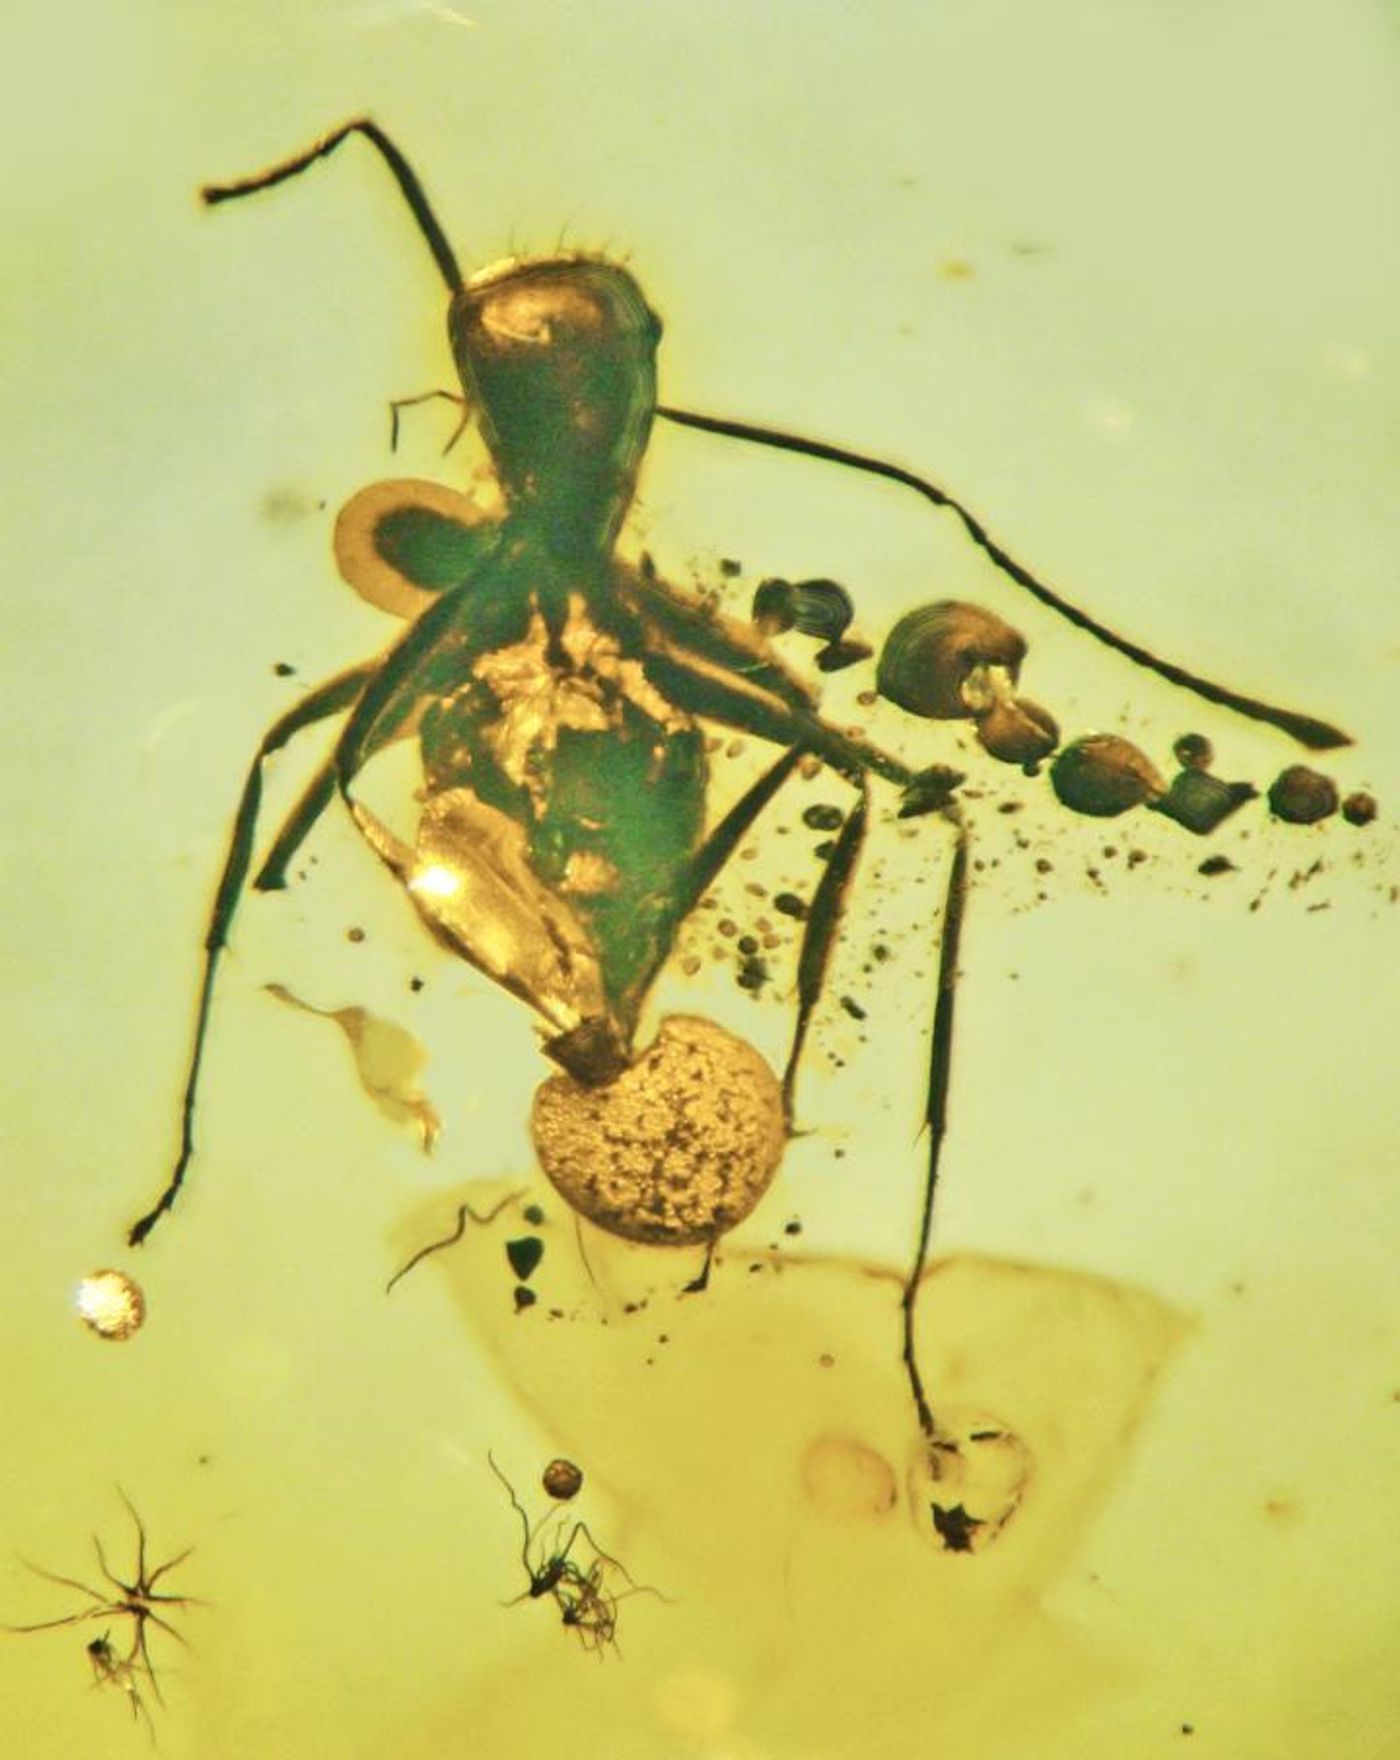 A new Ascomycota fungi is seen in an ant preserved in 50-million-year-old amber. The mushroom is growing out of the ant's rectum, and the vegetative part of the fungus is emerging from the abdomen and neck. Credit: Image courtesy George Poinar Jr.)